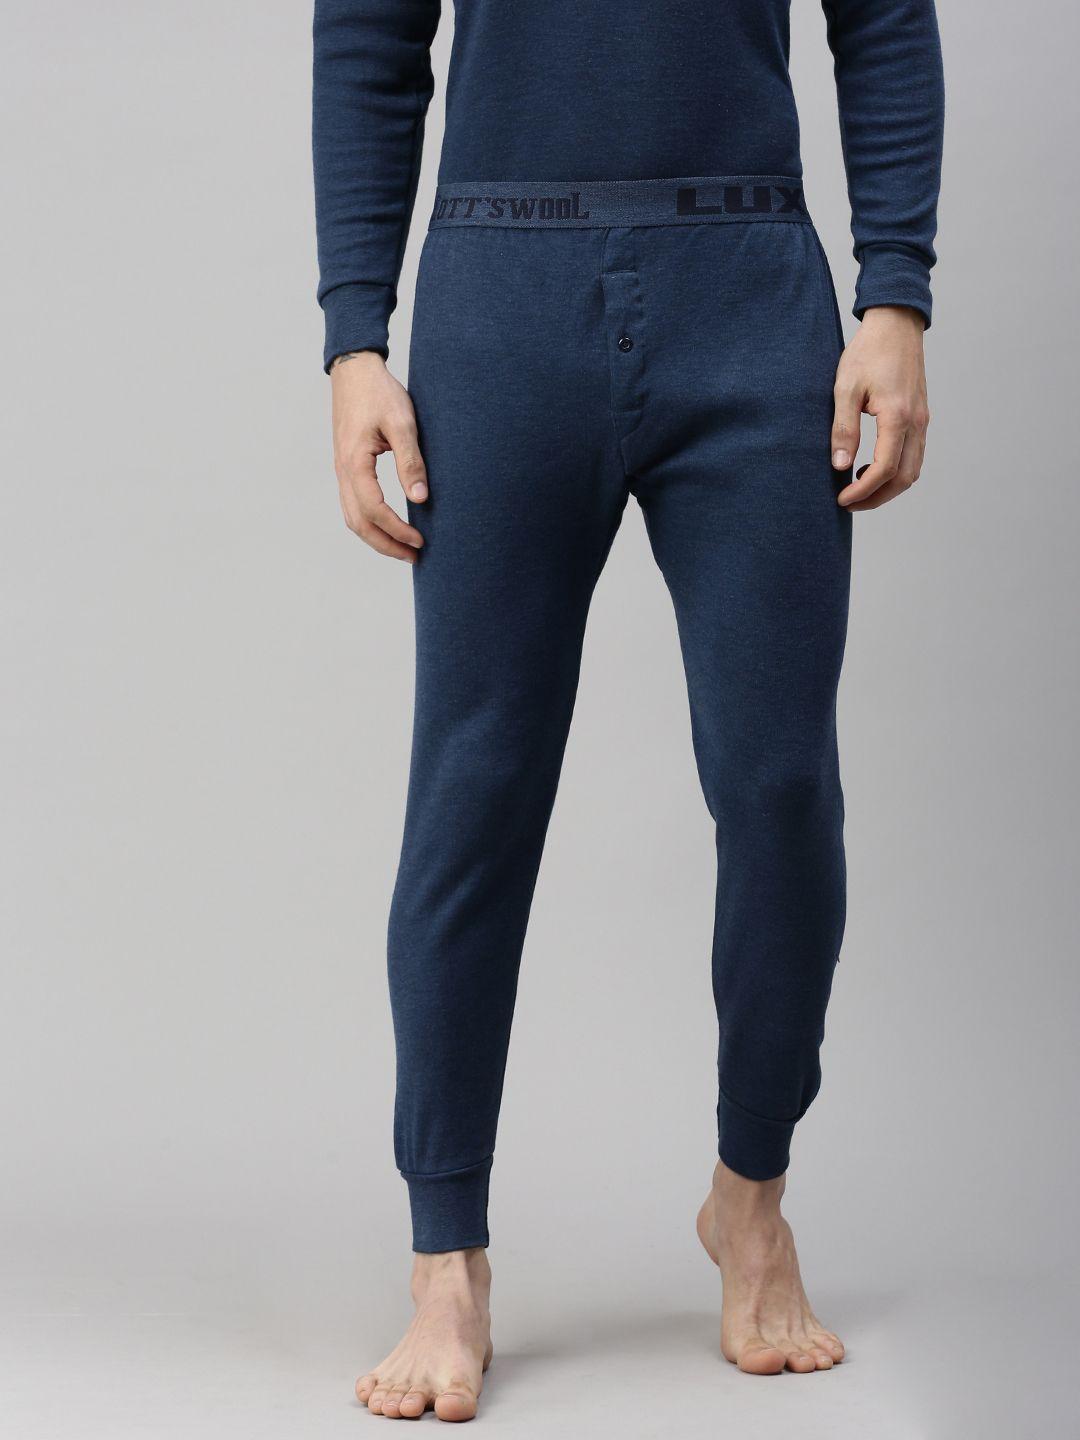 lux cottswool men blue solid cotton thermal bottom